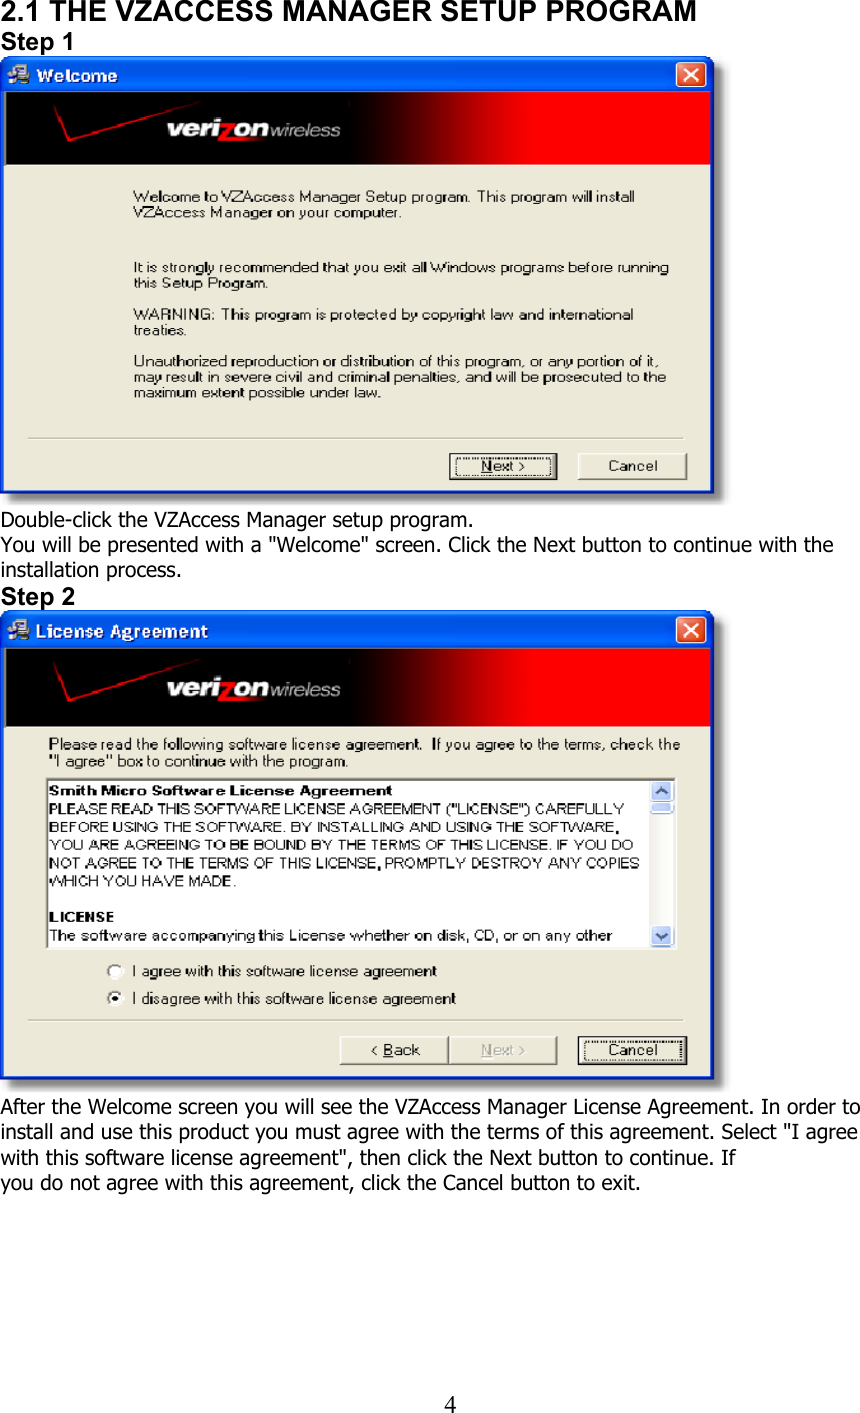  42.1 THE VZACCESS MANAGER SETUP PROGRAM Step 1  Double-click the VZAccess Manager setup program. You will be presented with a &quot;Welcome&quot; screen. Click the Next button to continue with the installation process. Step 2  After the Welcome screen you will see the VZAccess Manager License Agreement. In order to install and use this product you must agree with the terms of this agreement. Select &quot;I agree with this software license agreement&quot;, then click the Next button to continue. If you do not agree with this agreement, click the Cancel button to exit.   